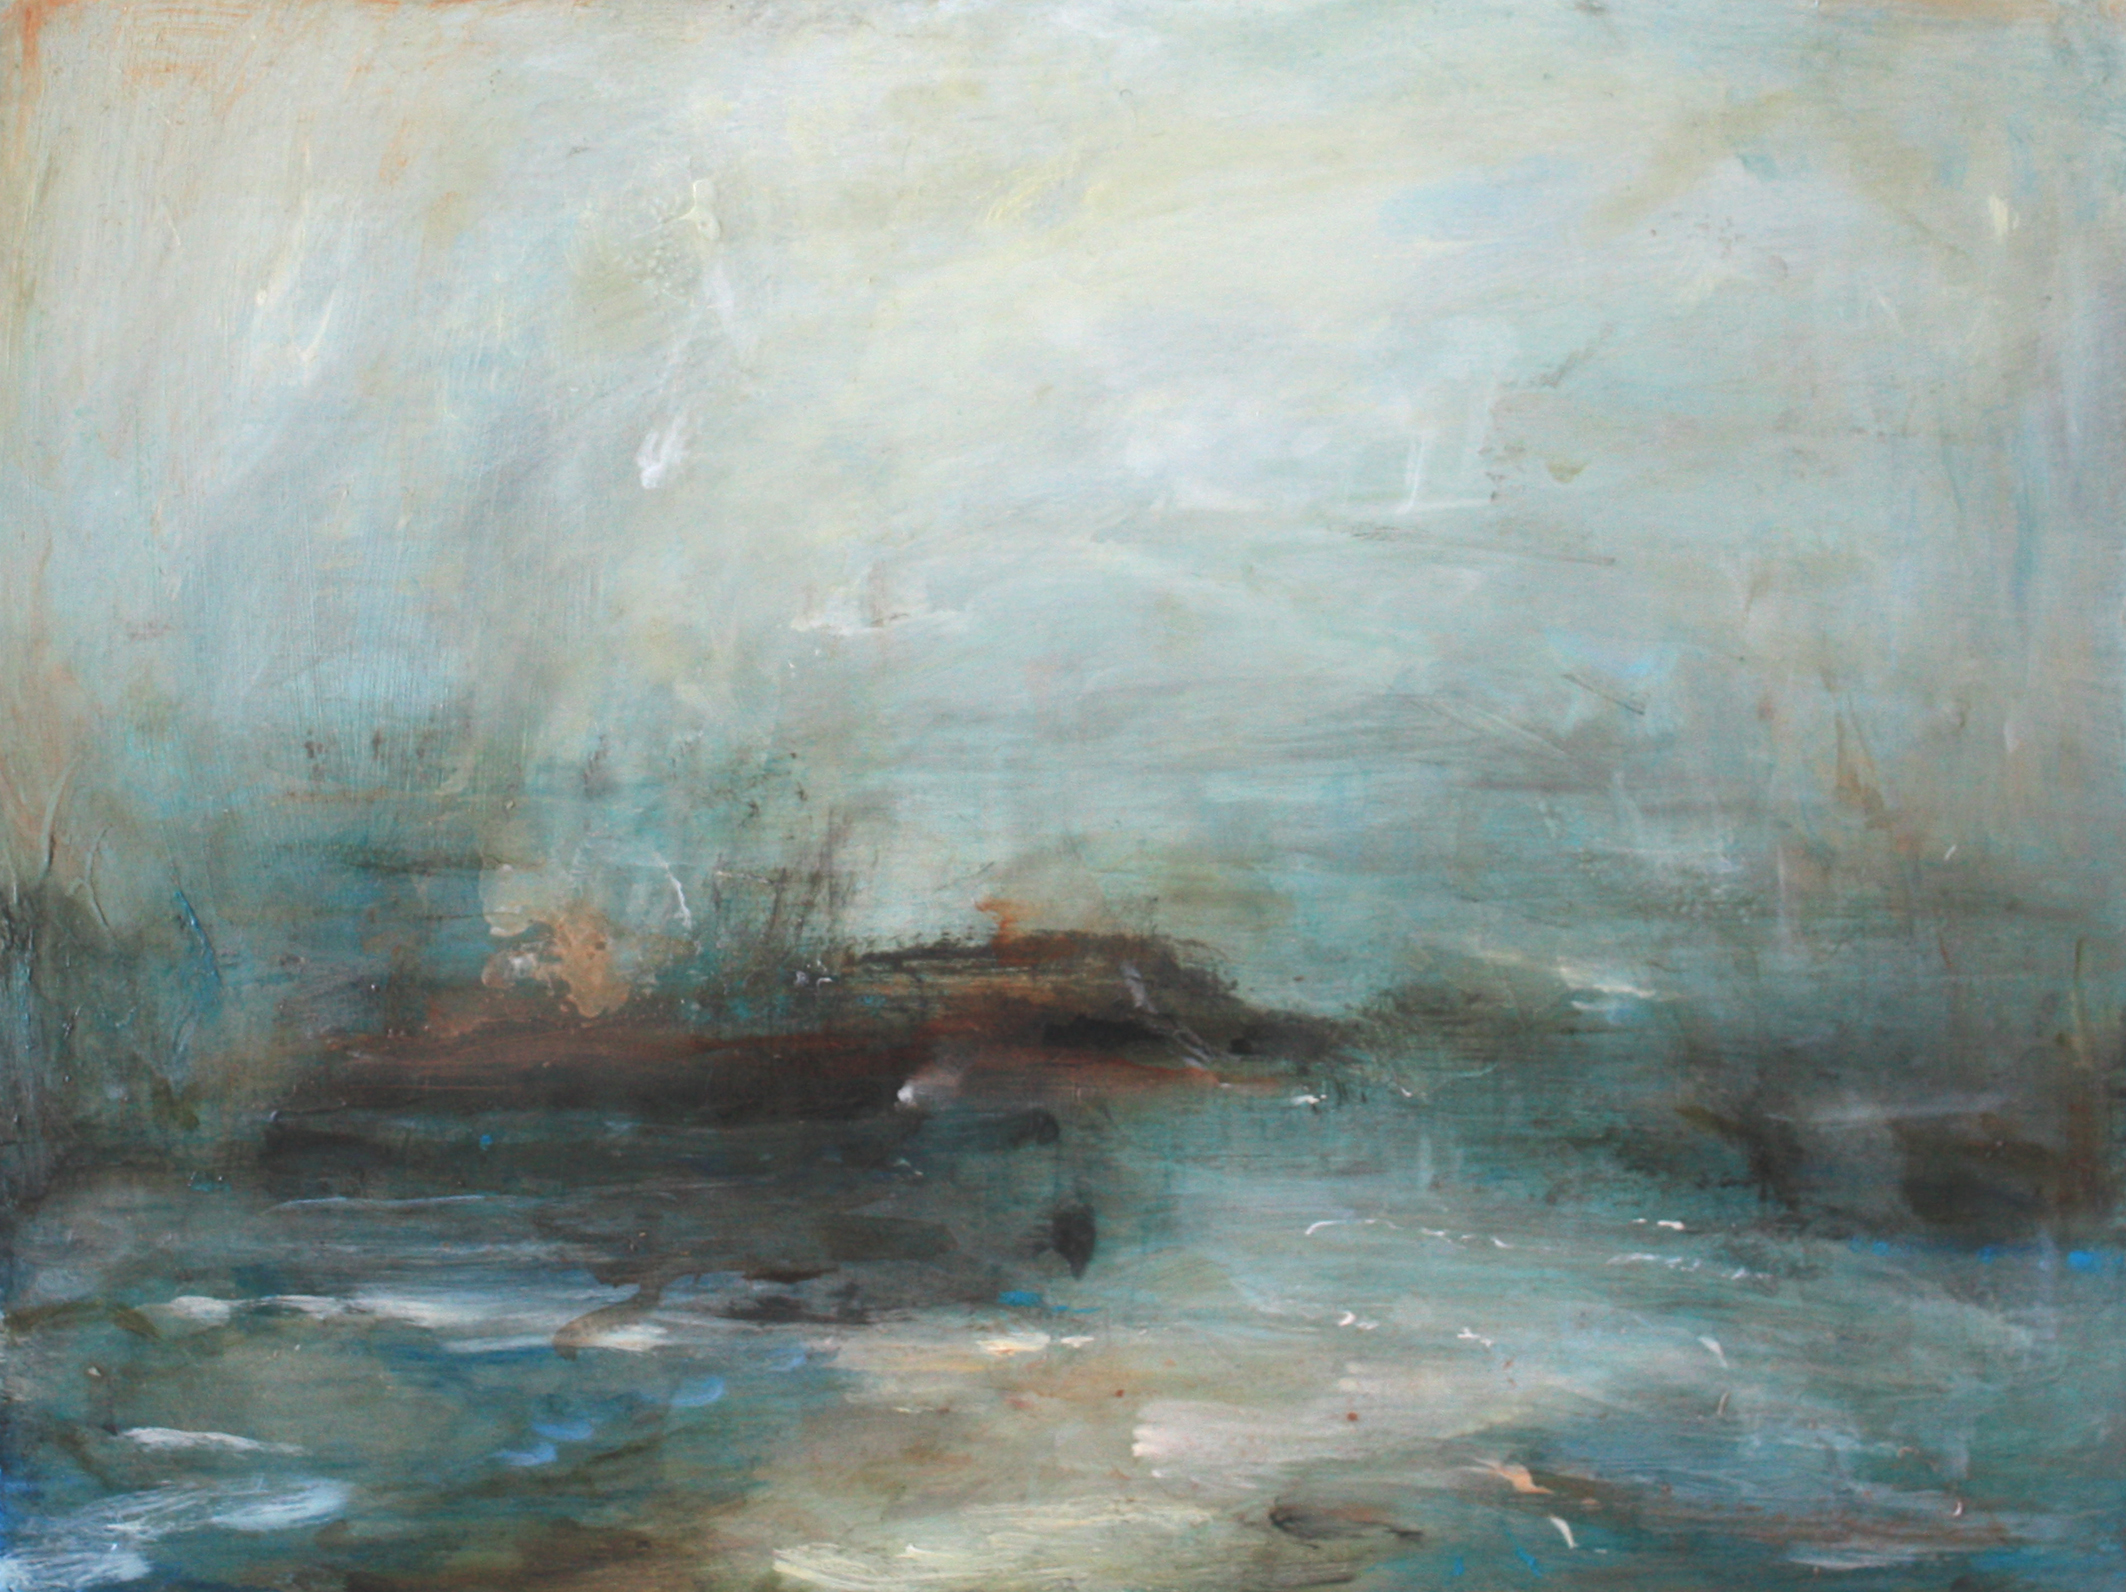  Title: Between Land and Sea Size: 23 x 31 cm Medium: Oil on panel Price: £1700 * Please contact the gallery for availability 